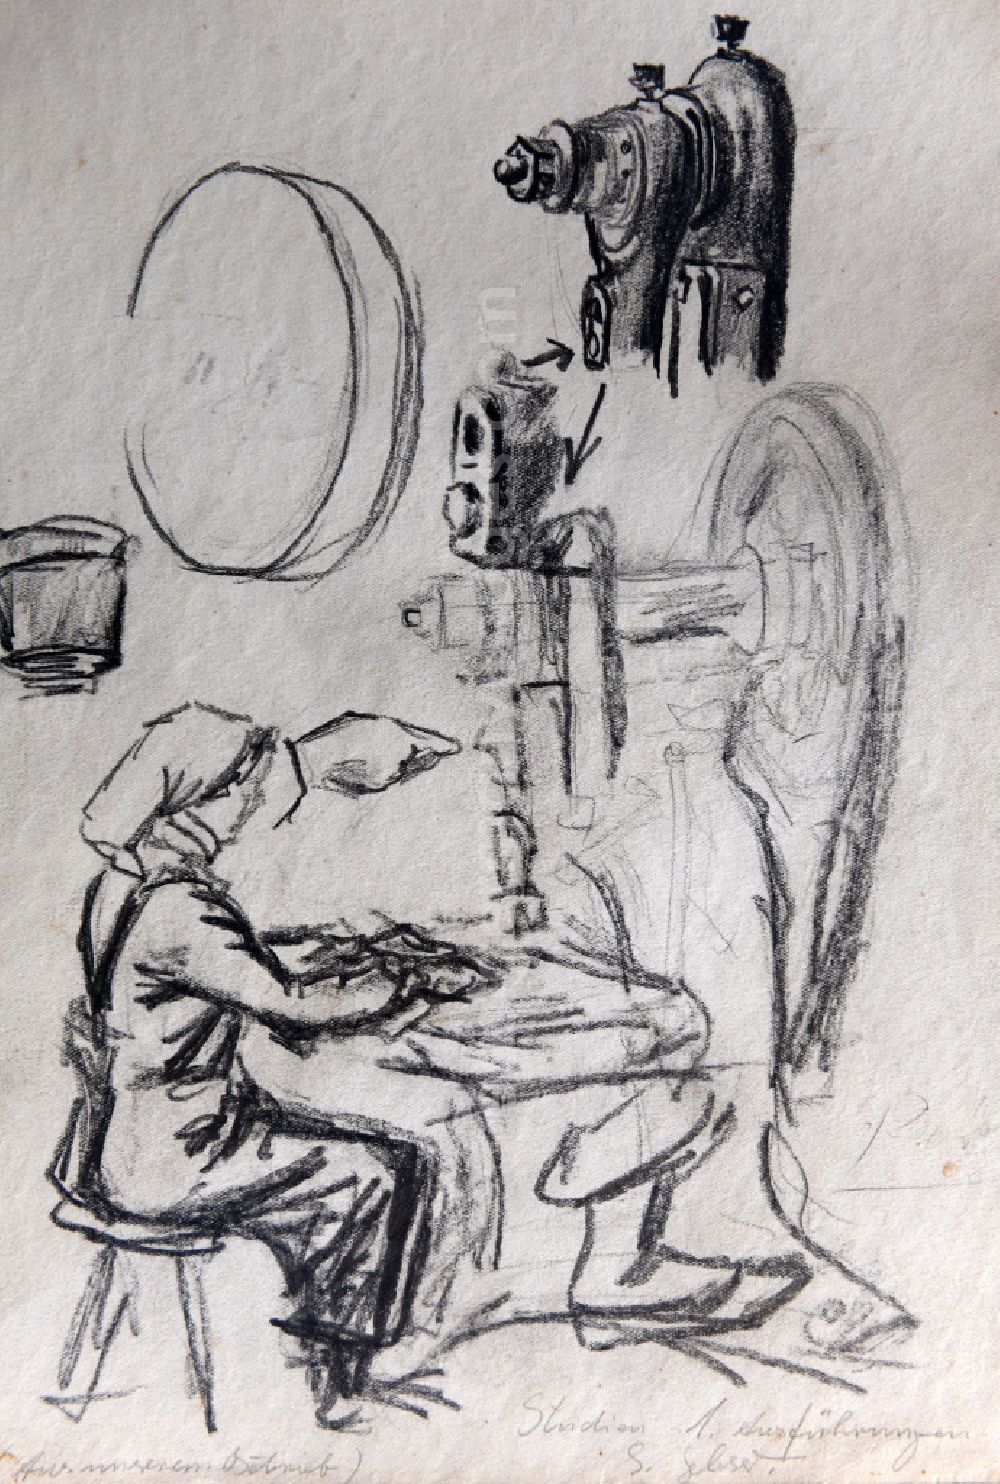 GDR image archive: Halberstadt - VG picture free work: pencil drawing seamstress by the artist Siegfried Gebser in Halberstadt in the state Saxony-Anhalt on the territory of the former GDR, German Democratic Republic